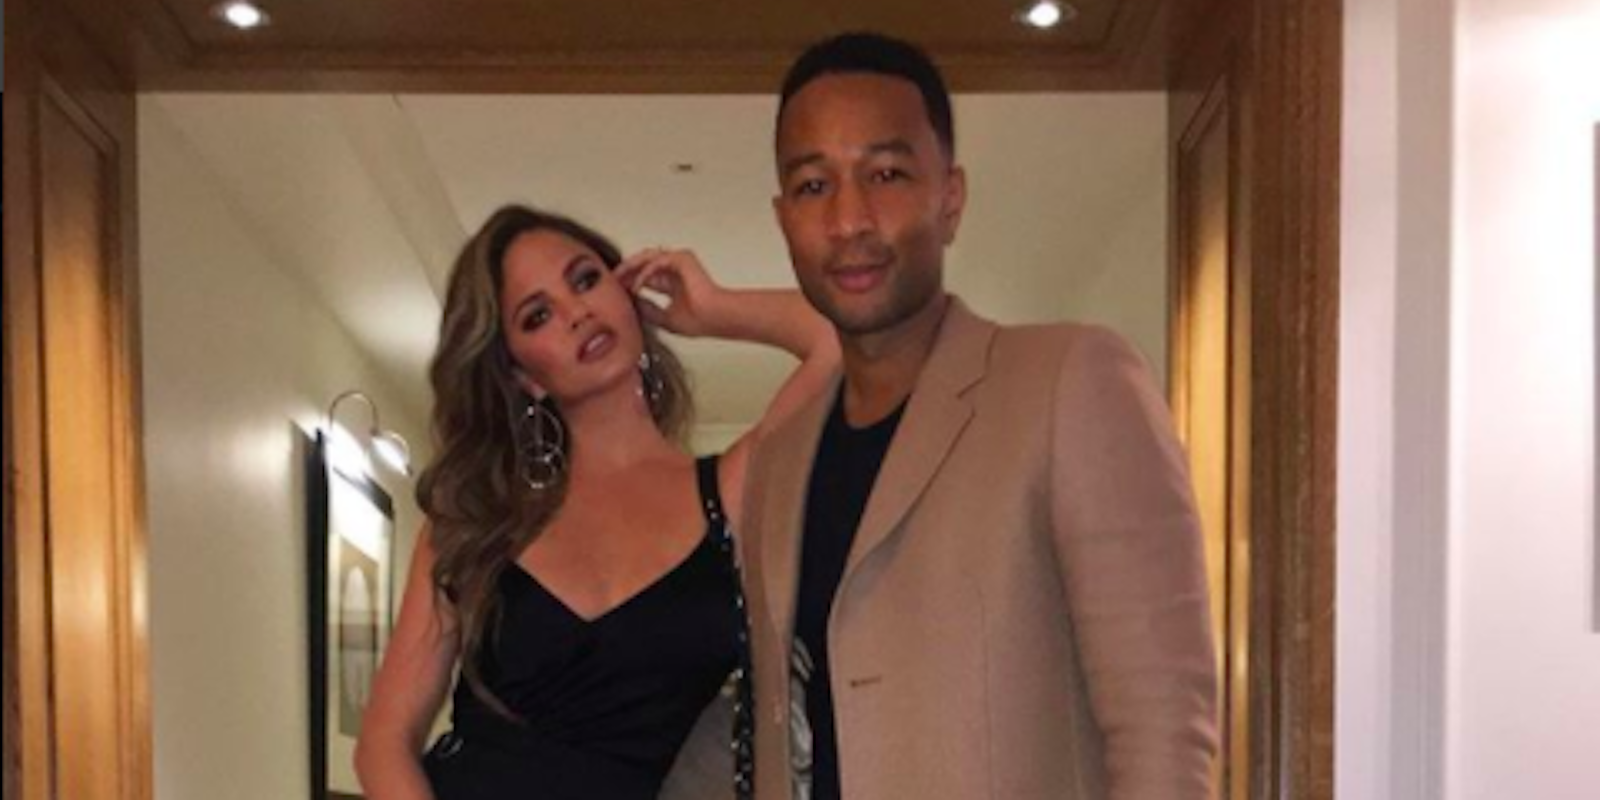 Chrissy Teigen and John Legend are expecting baby number two